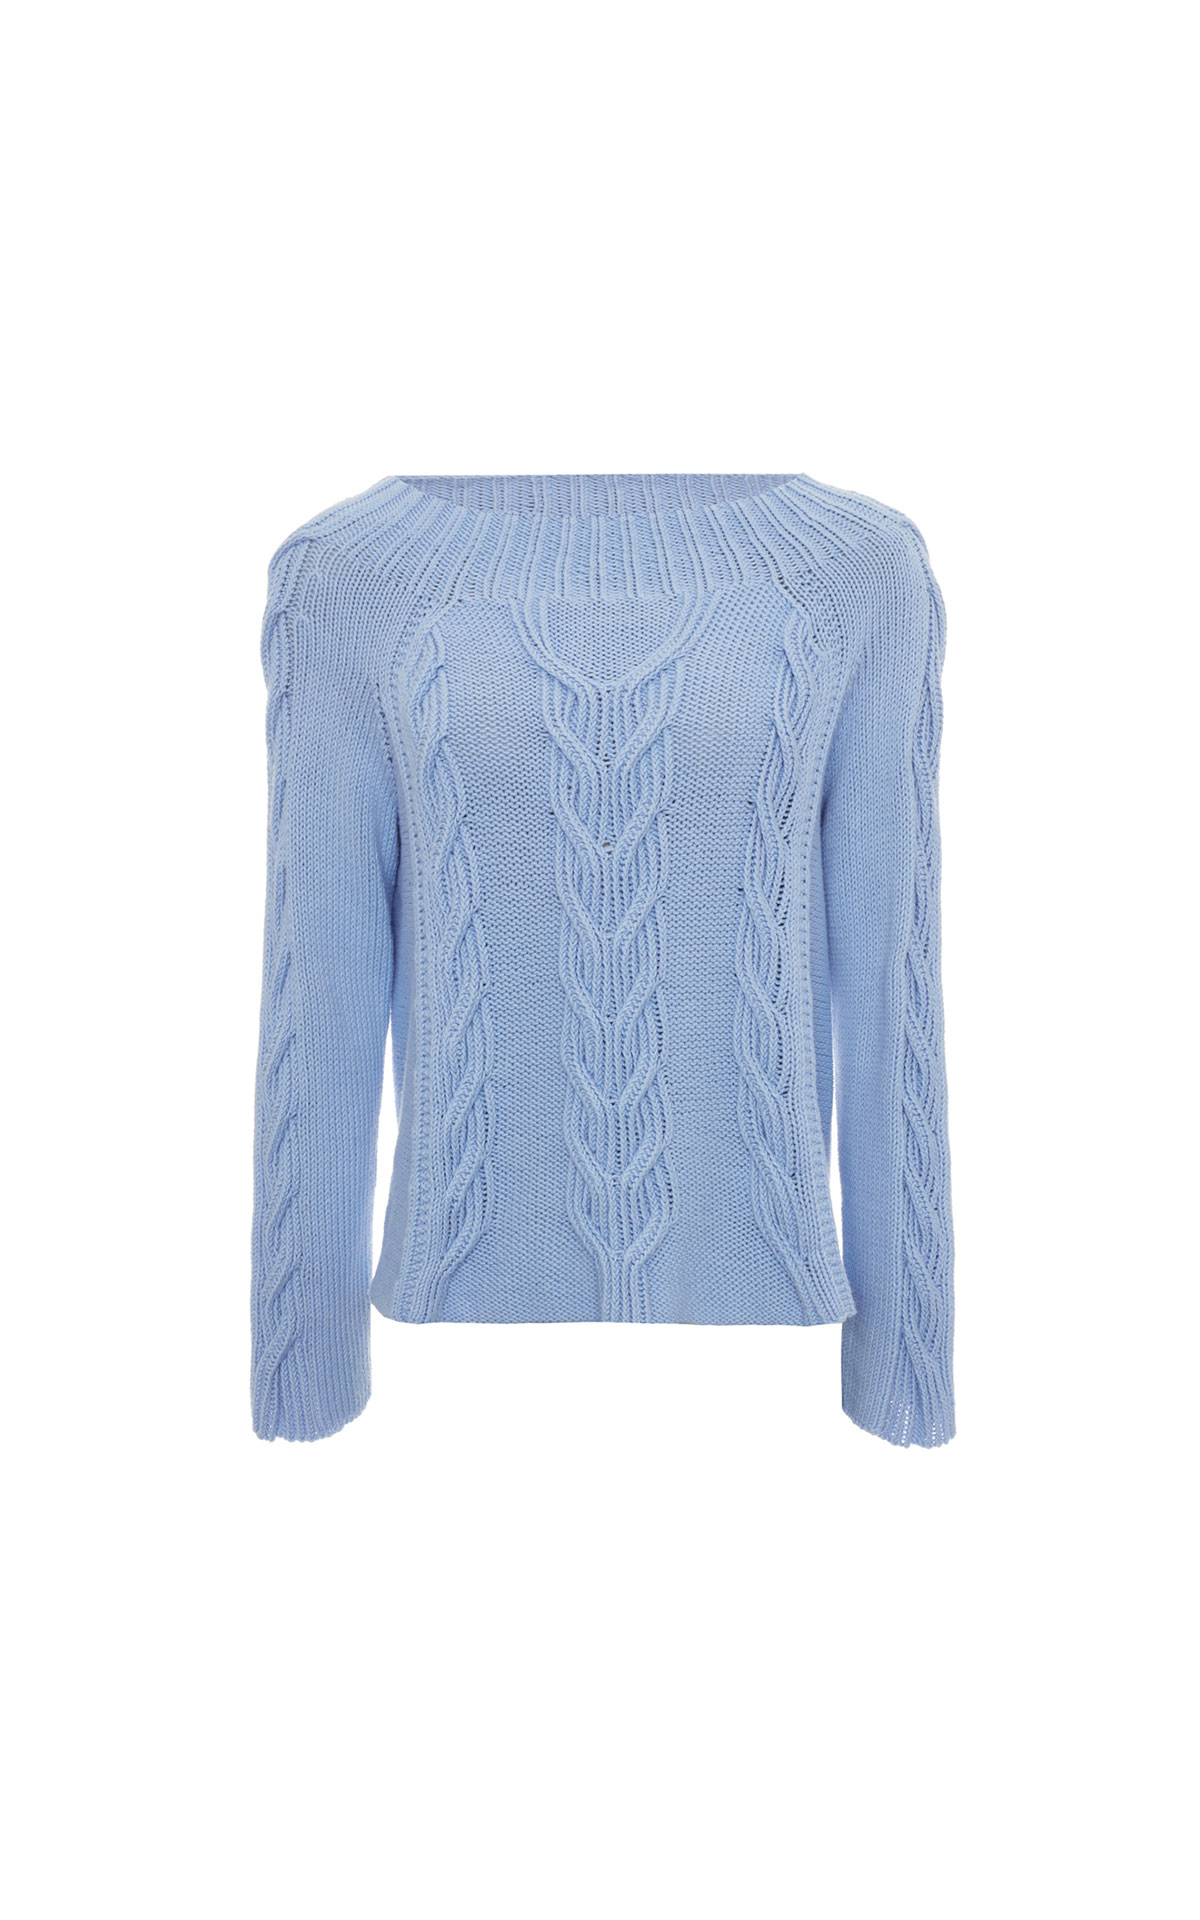 Bamford Amour handknit cashmere sweater from Bicester Village